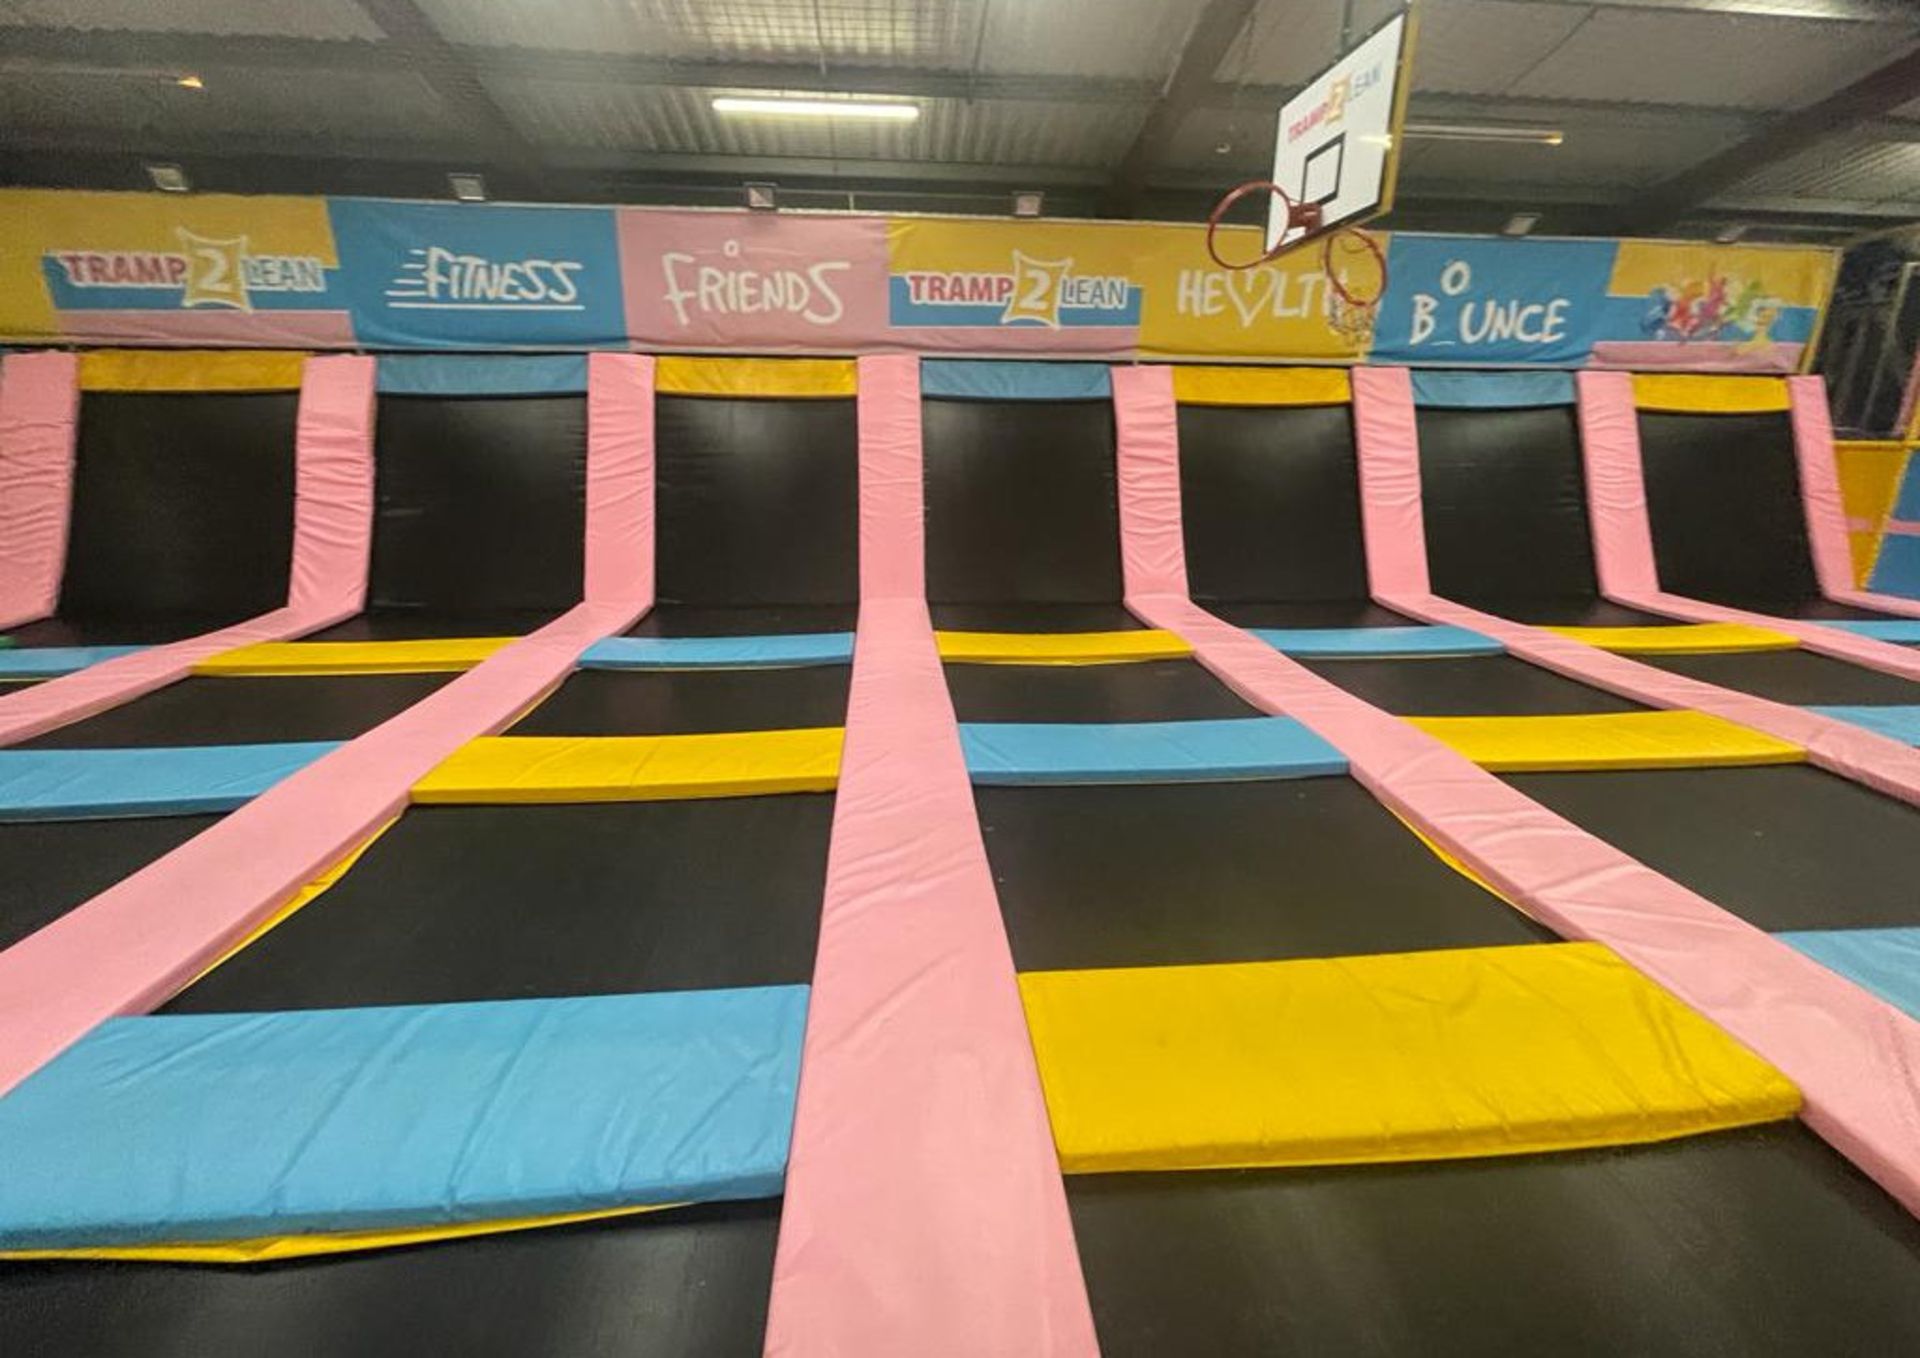 1 x Trampoline Park With Over 40 Interconnected Trampolines, Inflatable Activity Area, Waiting - Image 63 of 99